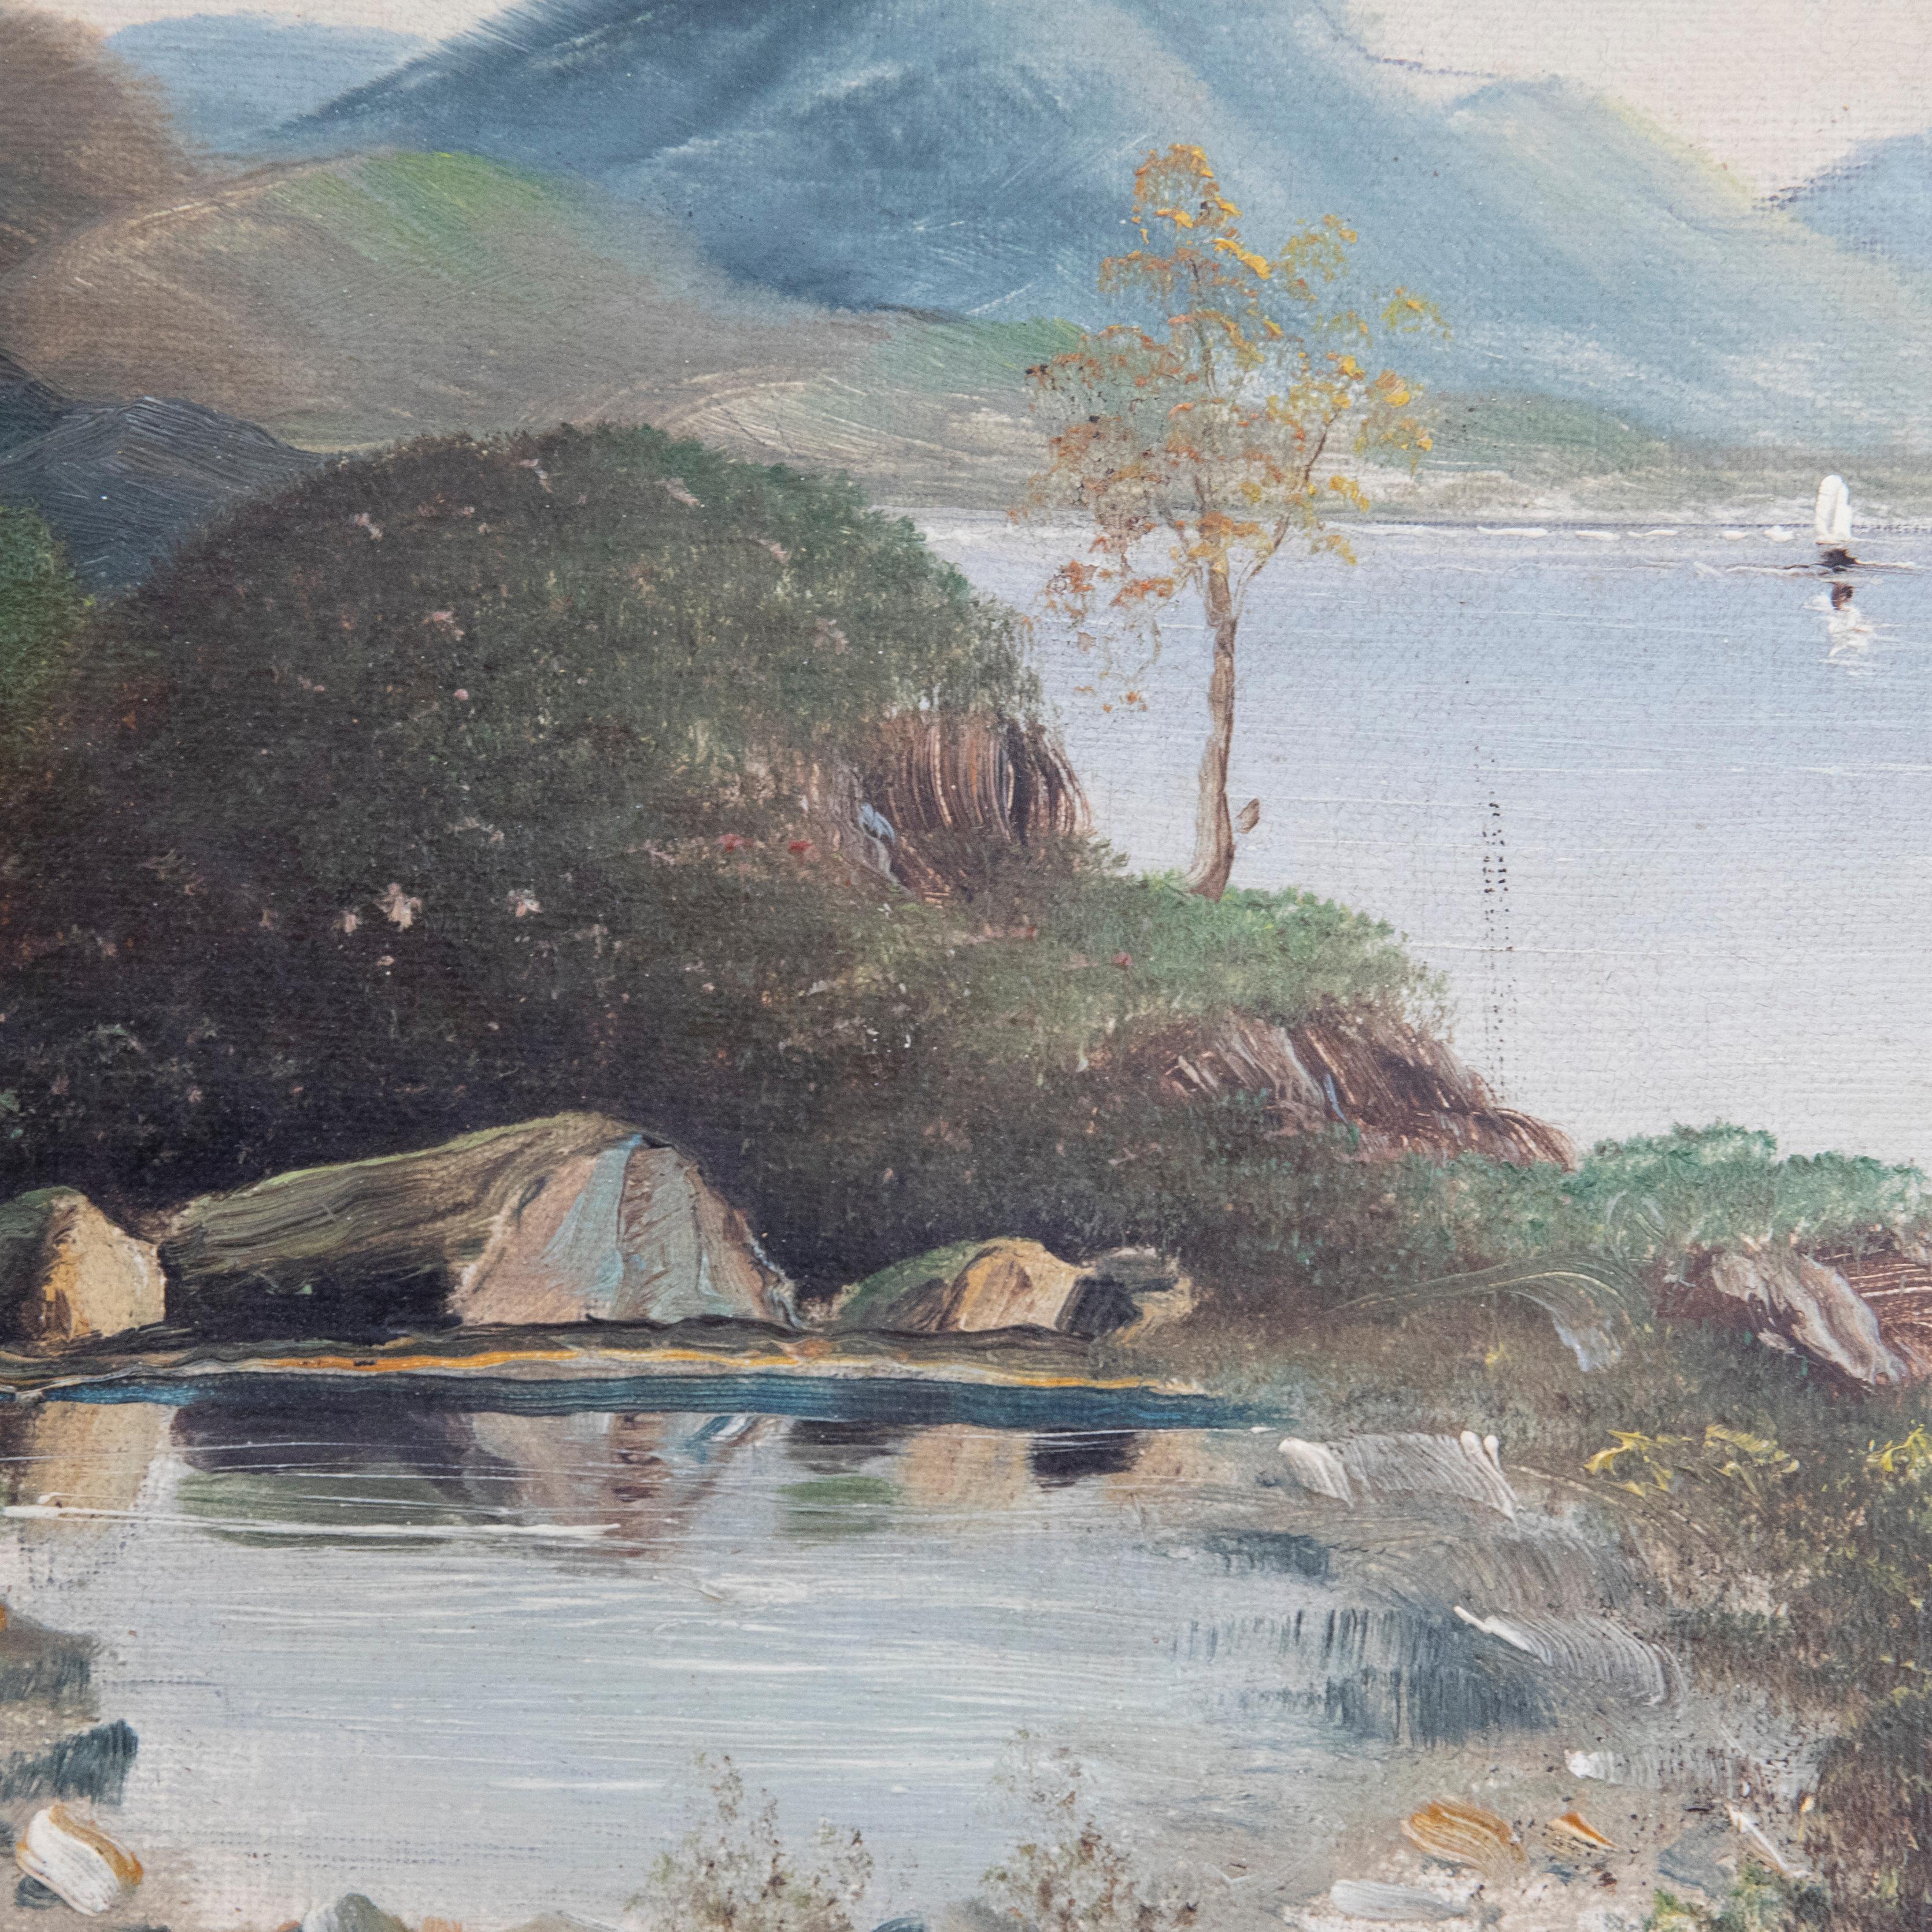 A charming depiction of a still lake with white sailing boat drifting past rolling hills. The artist has used a stipple technique with their brush to depict much of the ground cover and foliage. Well-presented in a handsome gilt-effect frame with